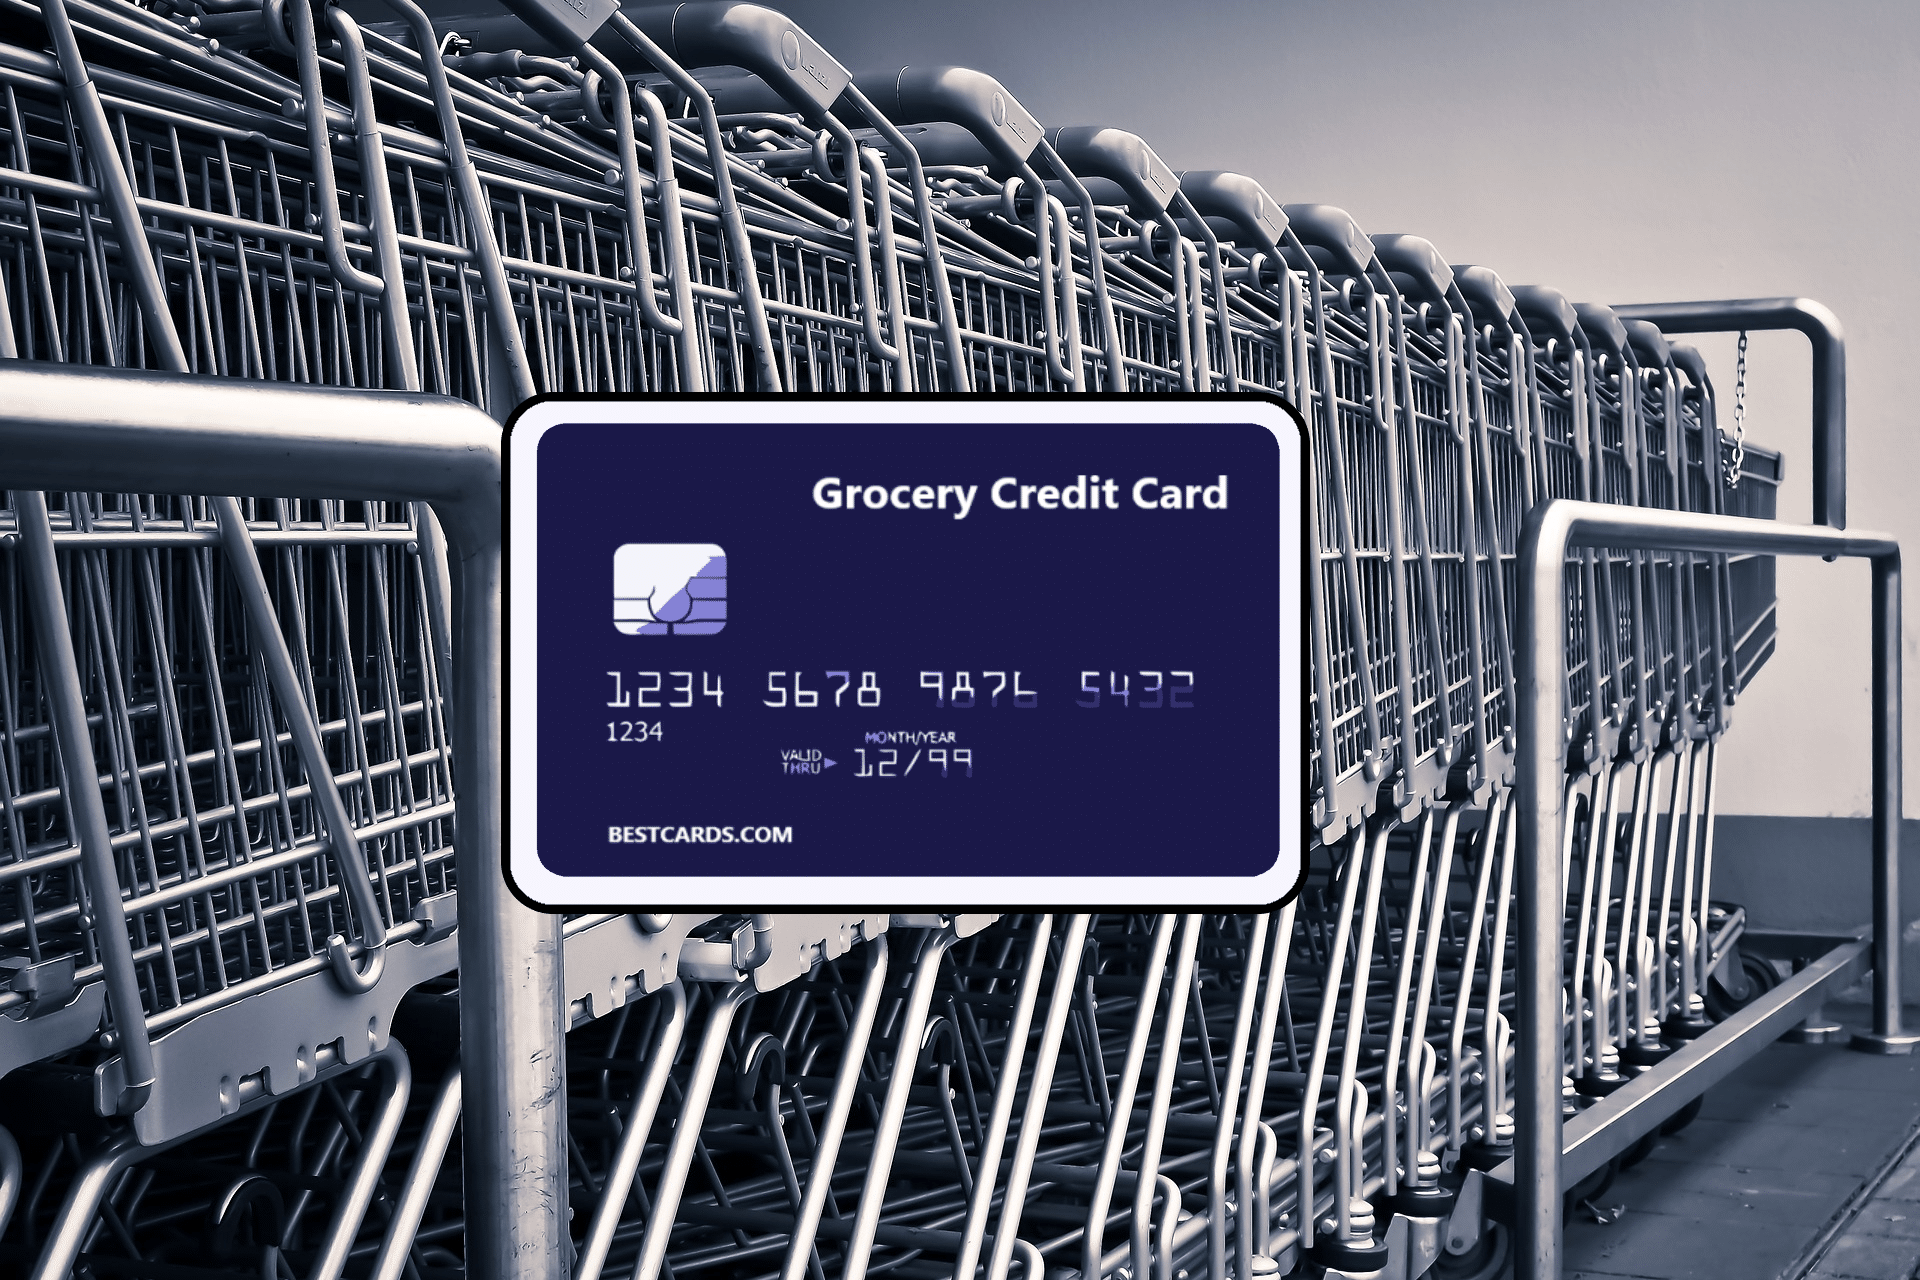 How to decide between a cobranded grocery store credit card and a basic cash back credit card